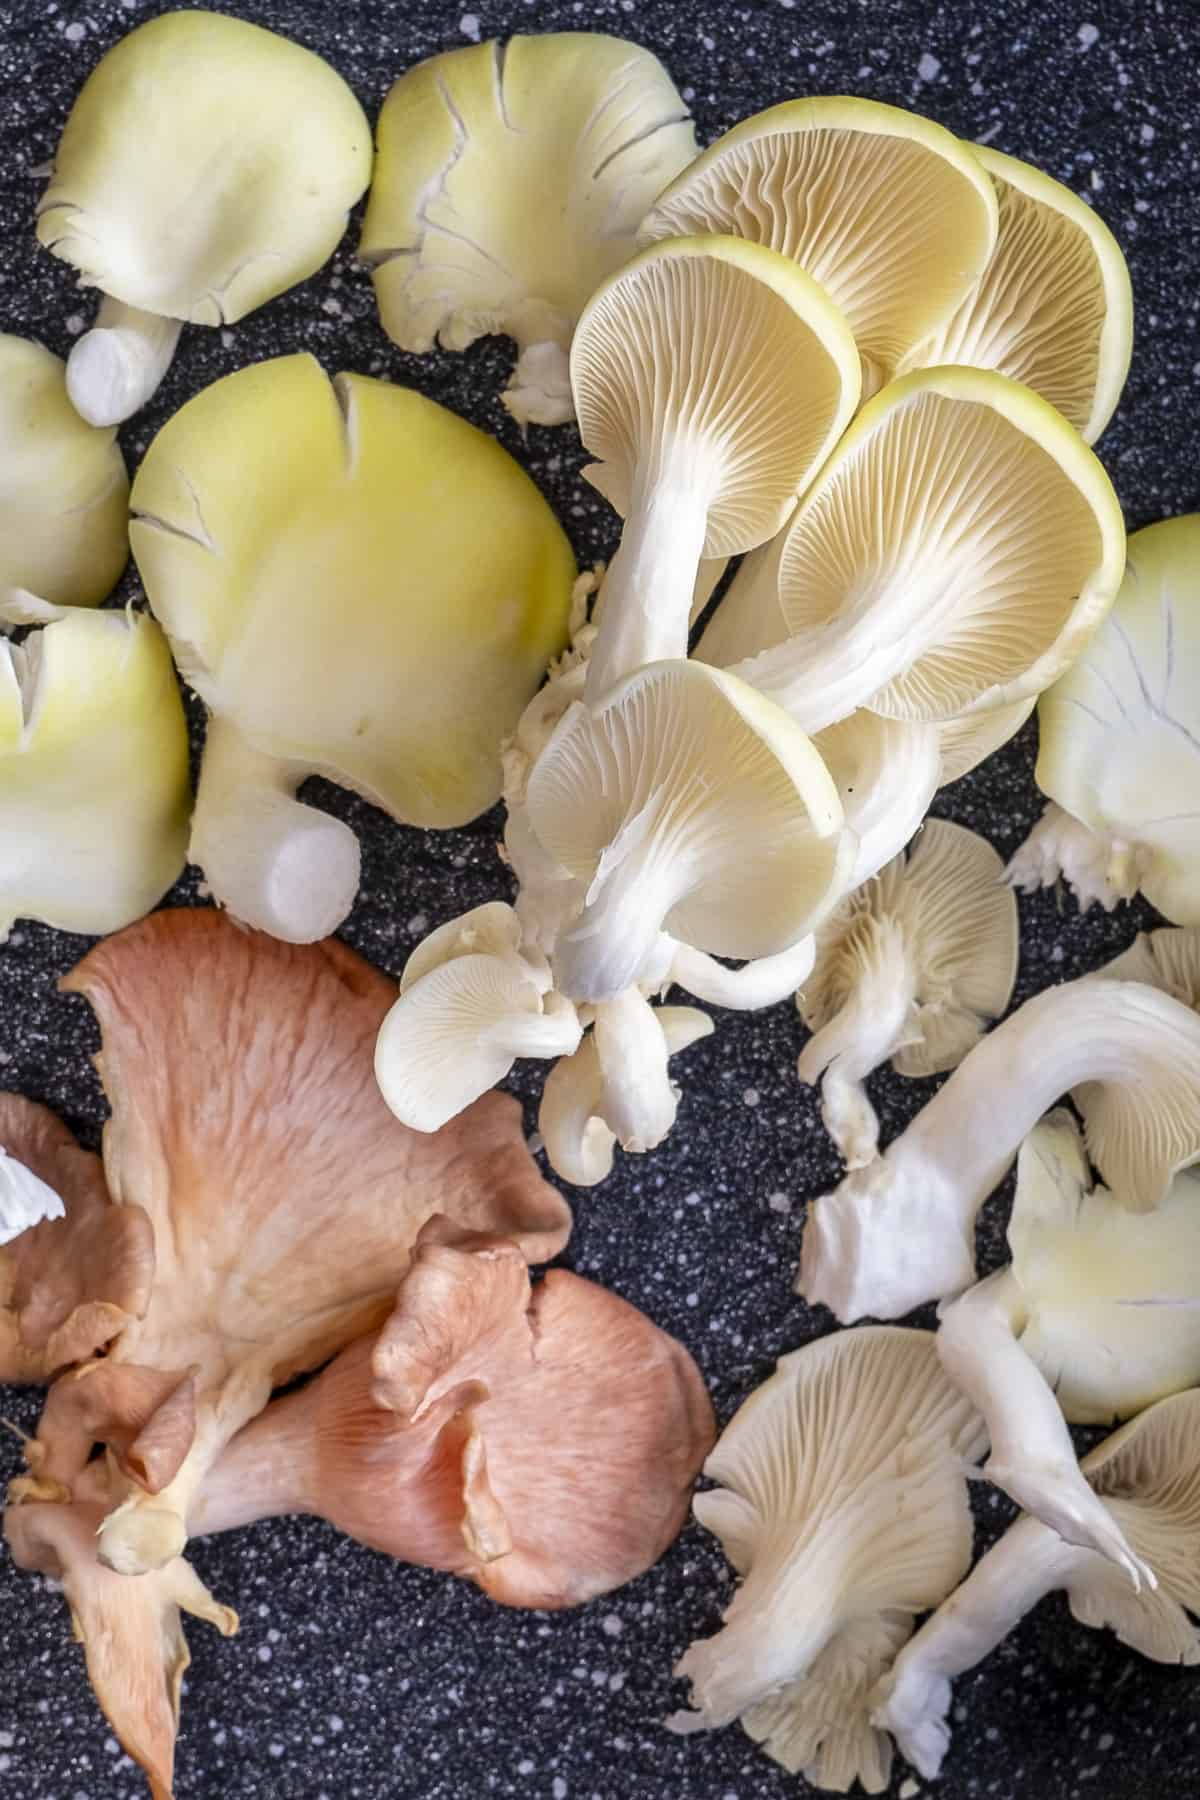 Golden and pink oyster mushrooms on a dark background.